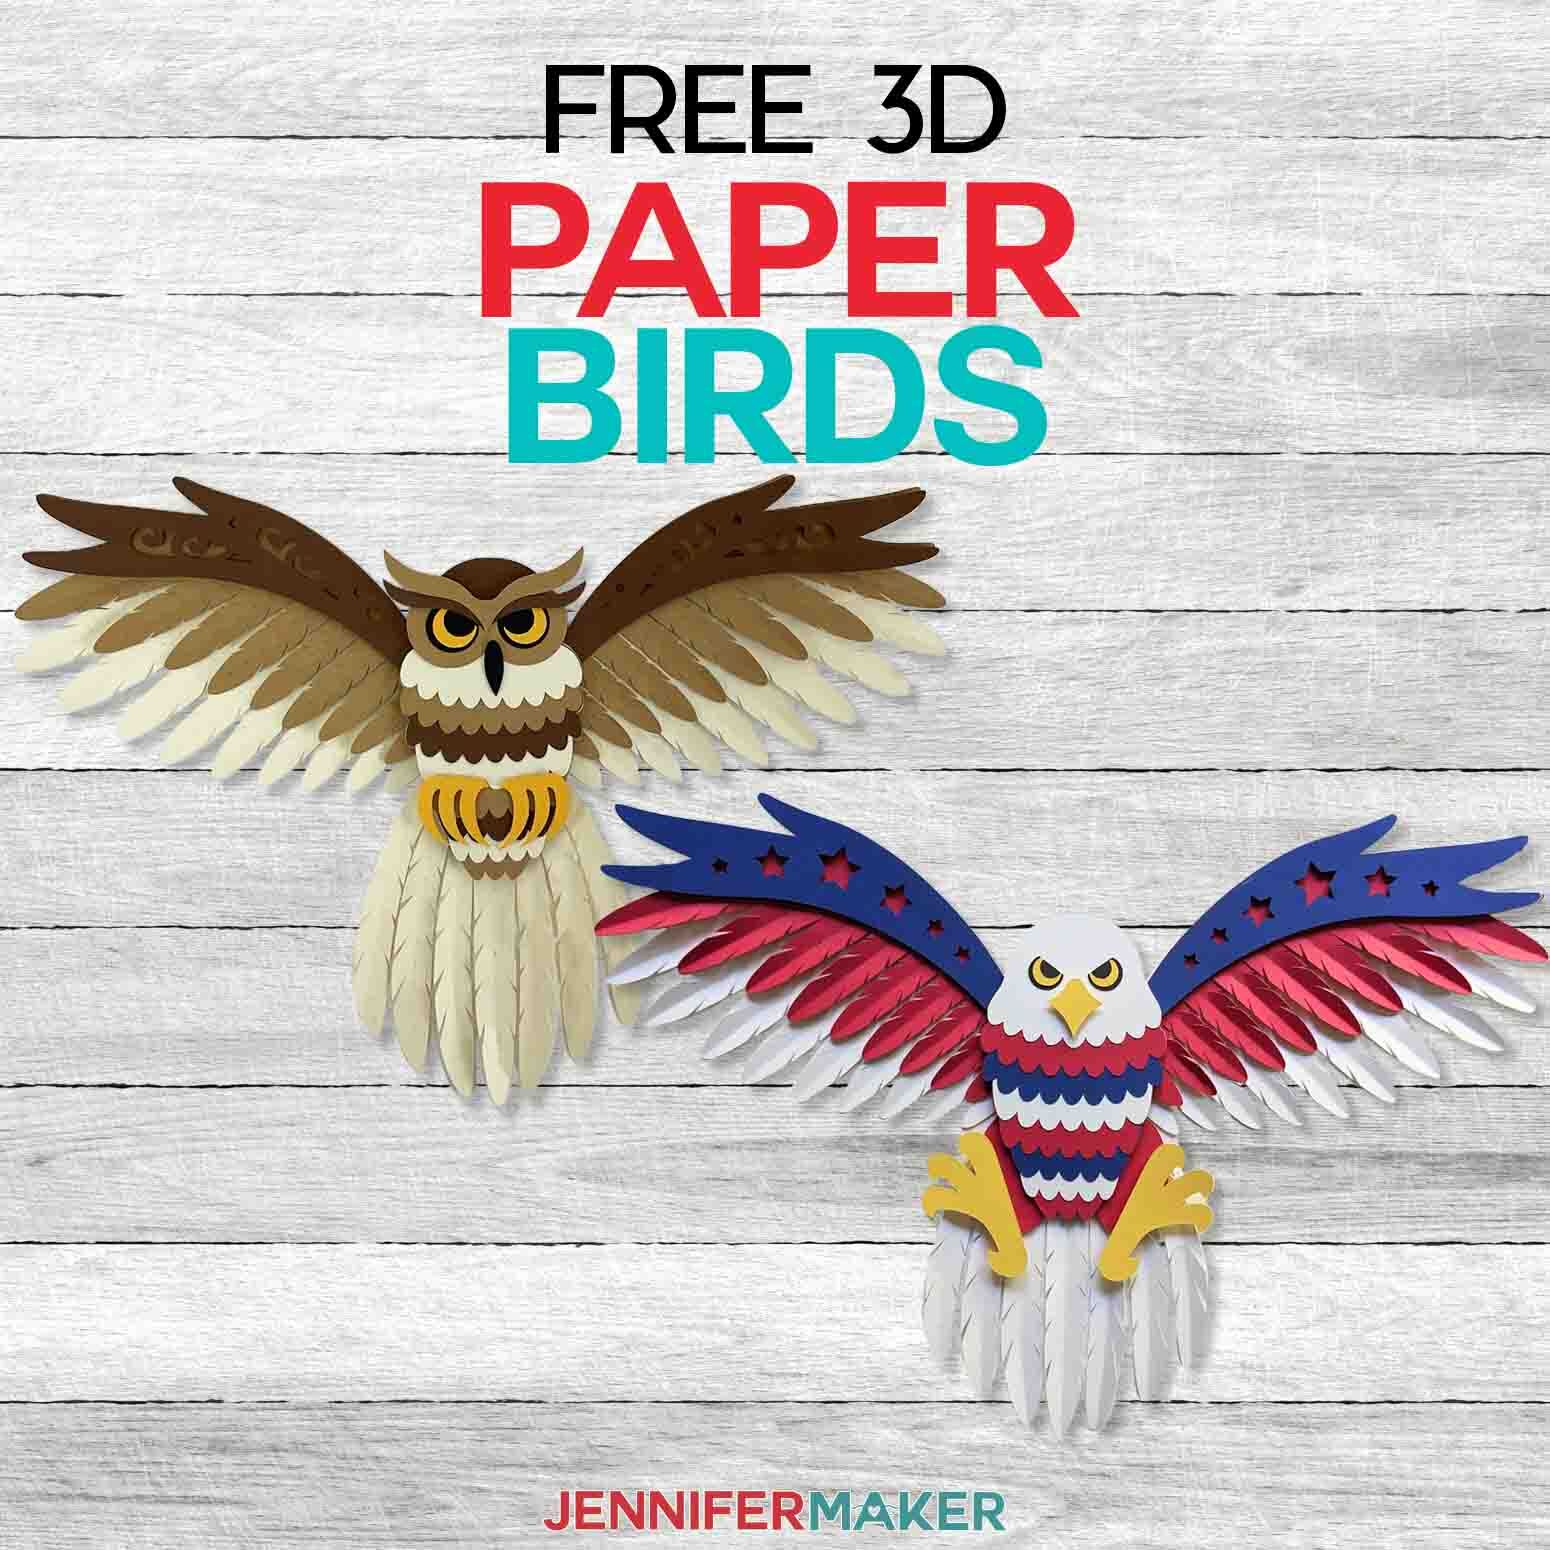 Papercraft layered owl made of tan, brown, black, and yellow cardstock with spread wings and 4th of July style eagle under the words Free 3D Paper Birds on a gray background.